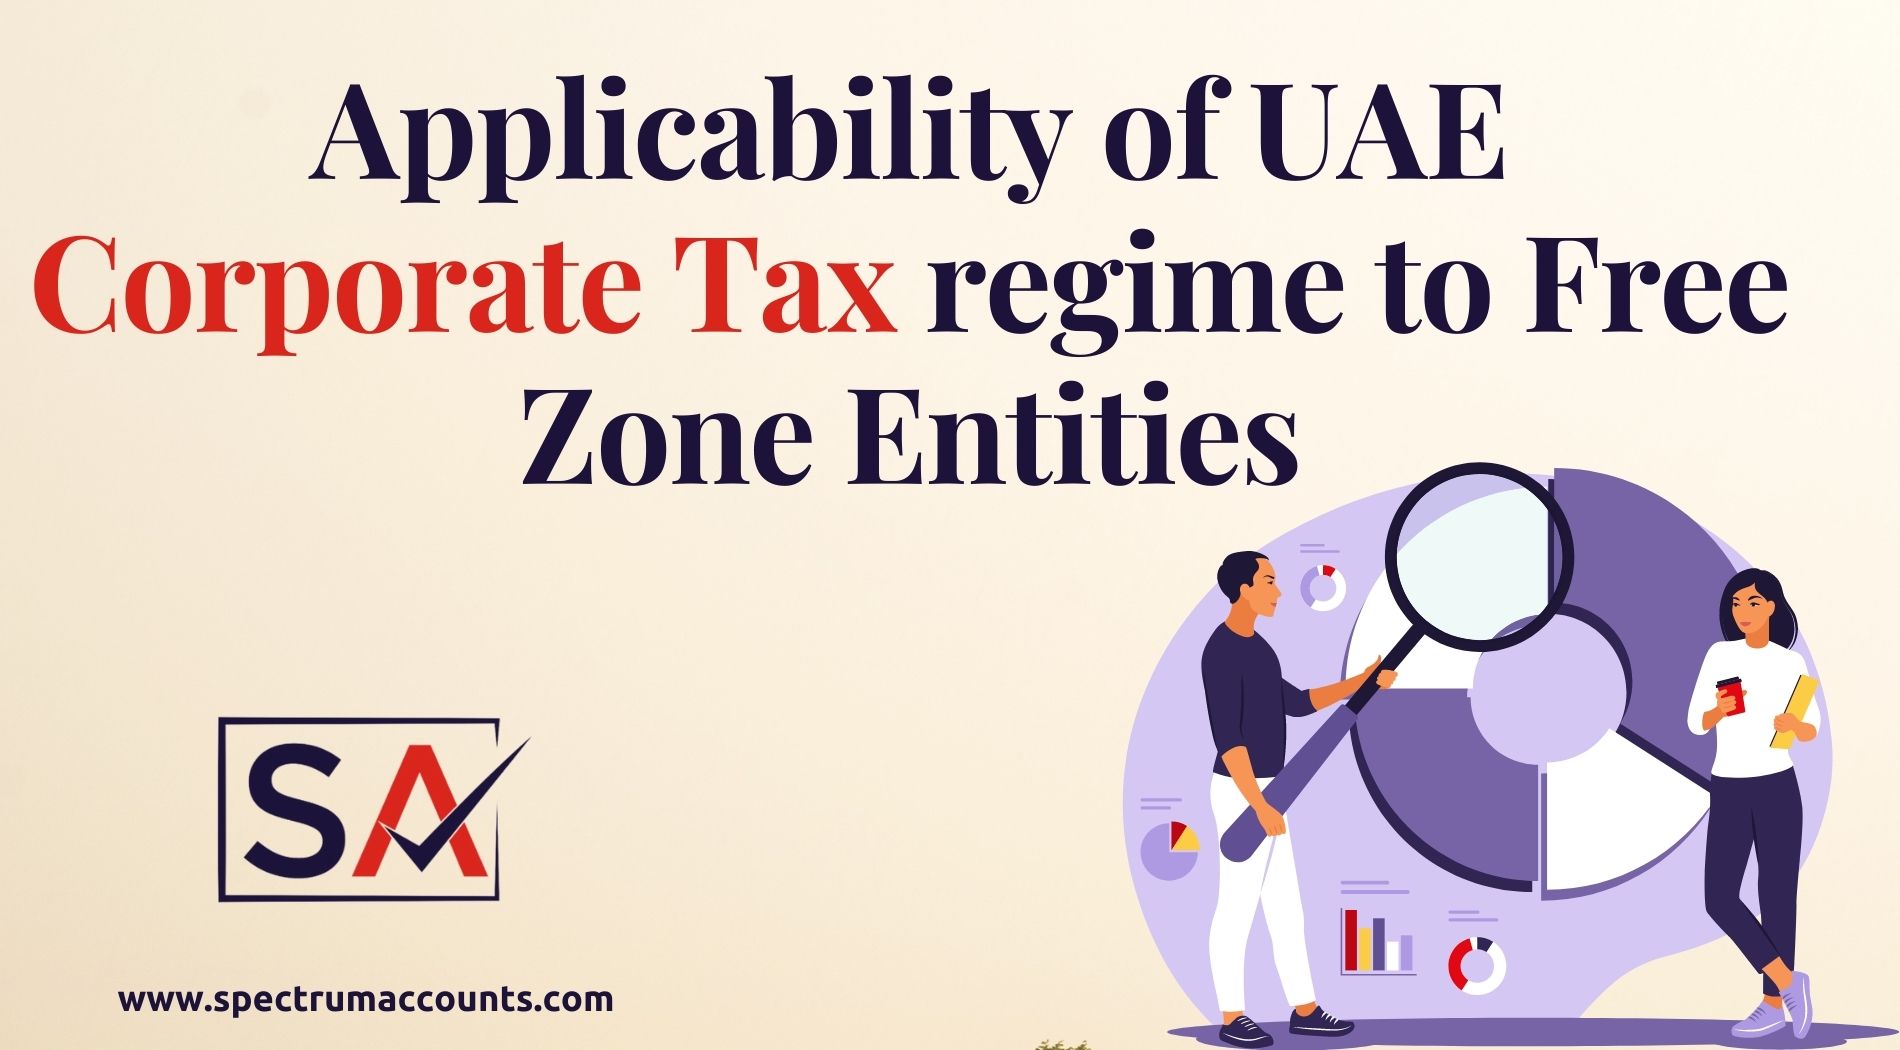 Applicability Of UAE Corporate Tax Regime To Free Zone Entities